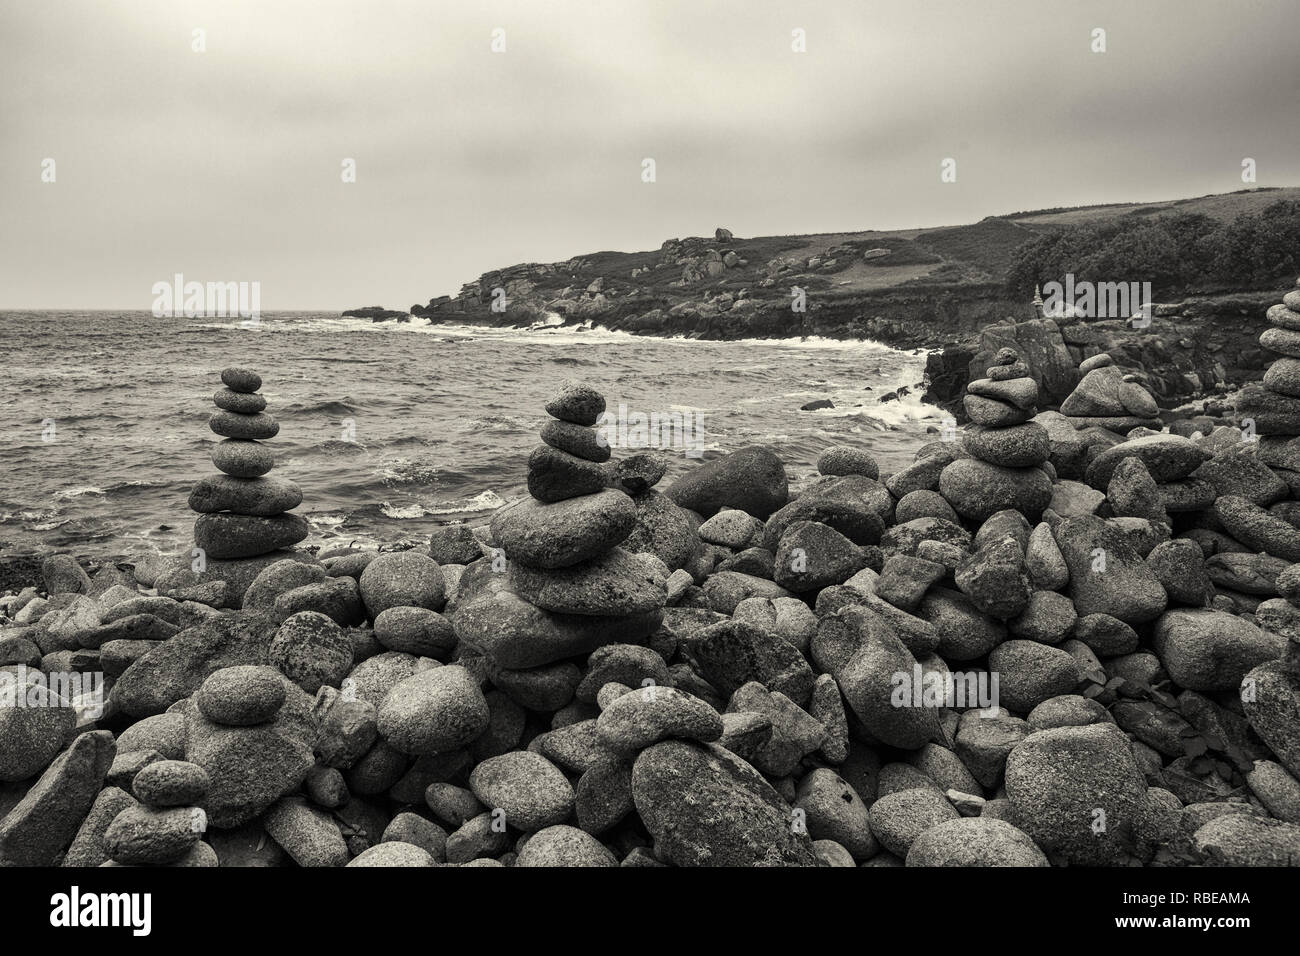 Stone cairn sculptures, Old Town Bay, St. Mary's, Isles of Scilly, UK.  Black and white version Stock Photo